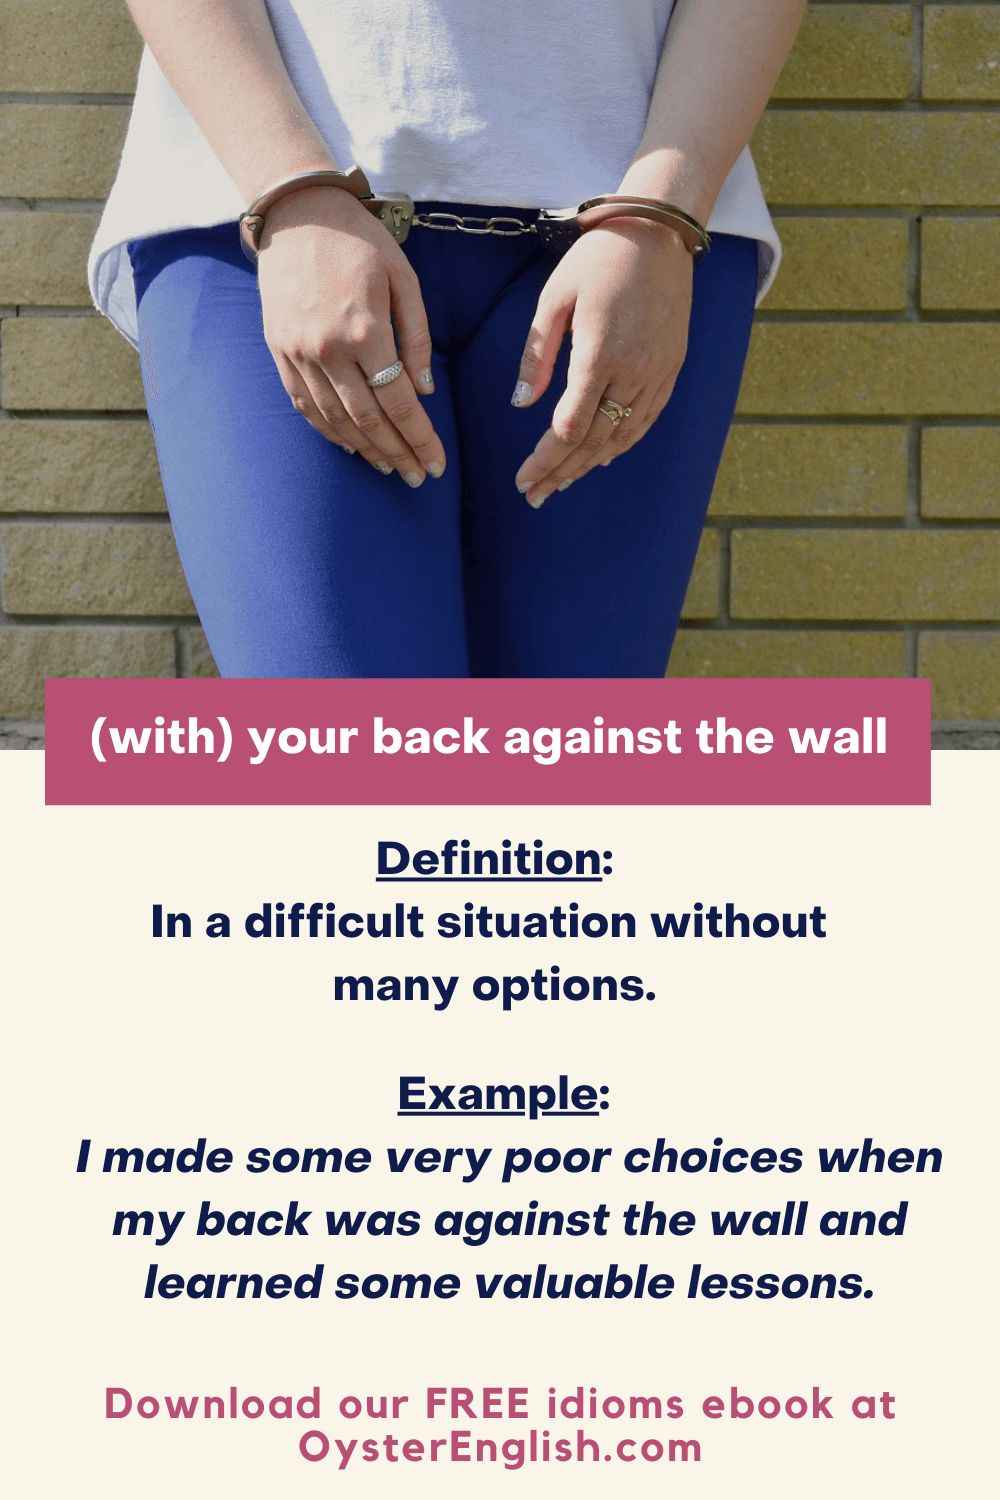 A young woman standing with her back against the wall with her hands handcuffed in front: I made some very poor decisions when my back was against the wall and learned some valuable lessons.